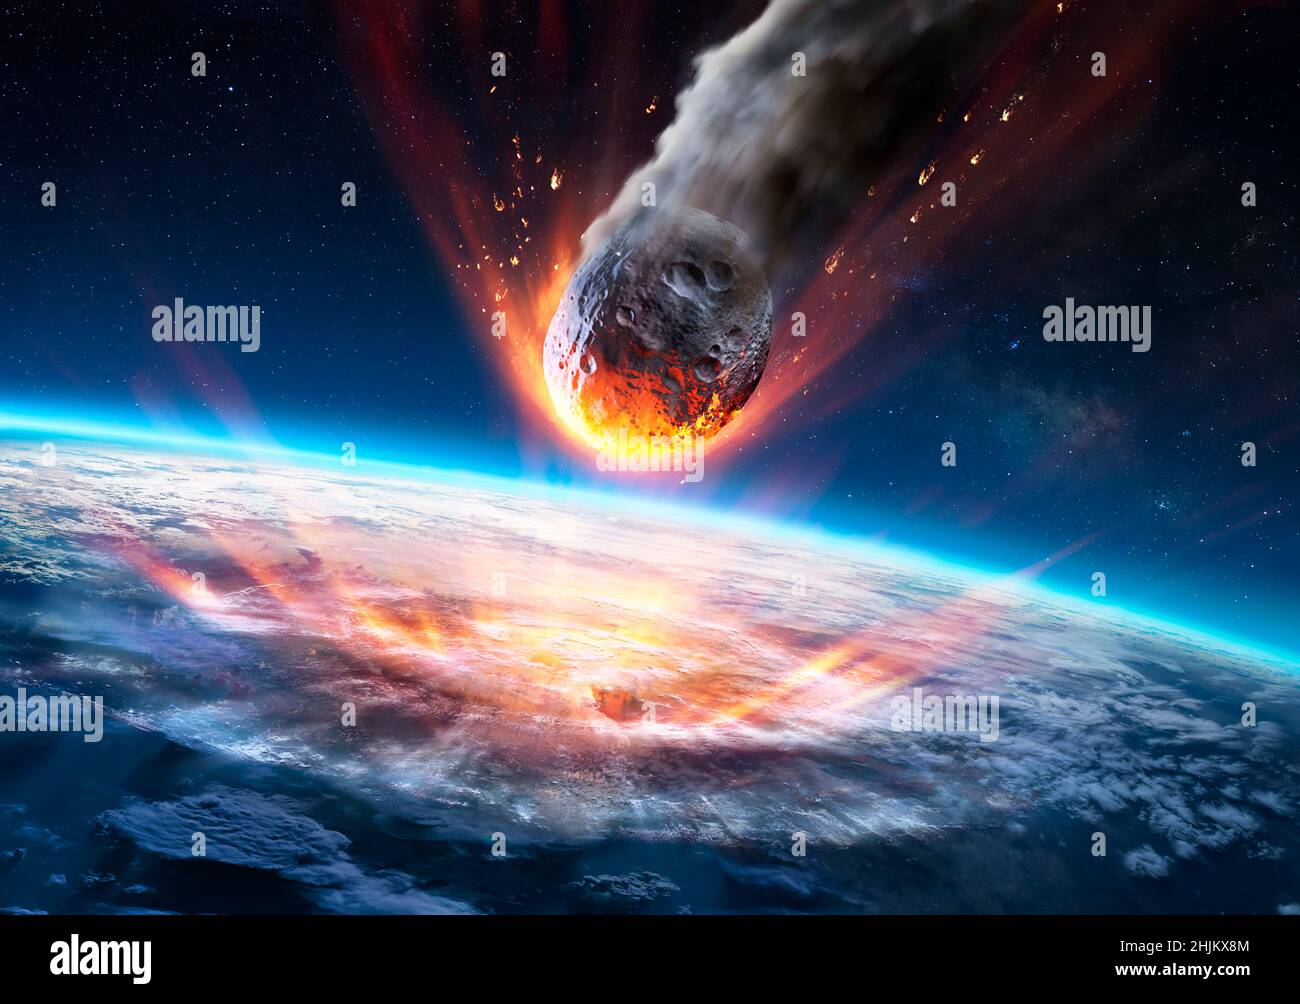 Asteroid Impact On Earth - Meteor In Collision With Planet - Contain 3d Rendering - elements of this image furnished by NASA Stock Photo